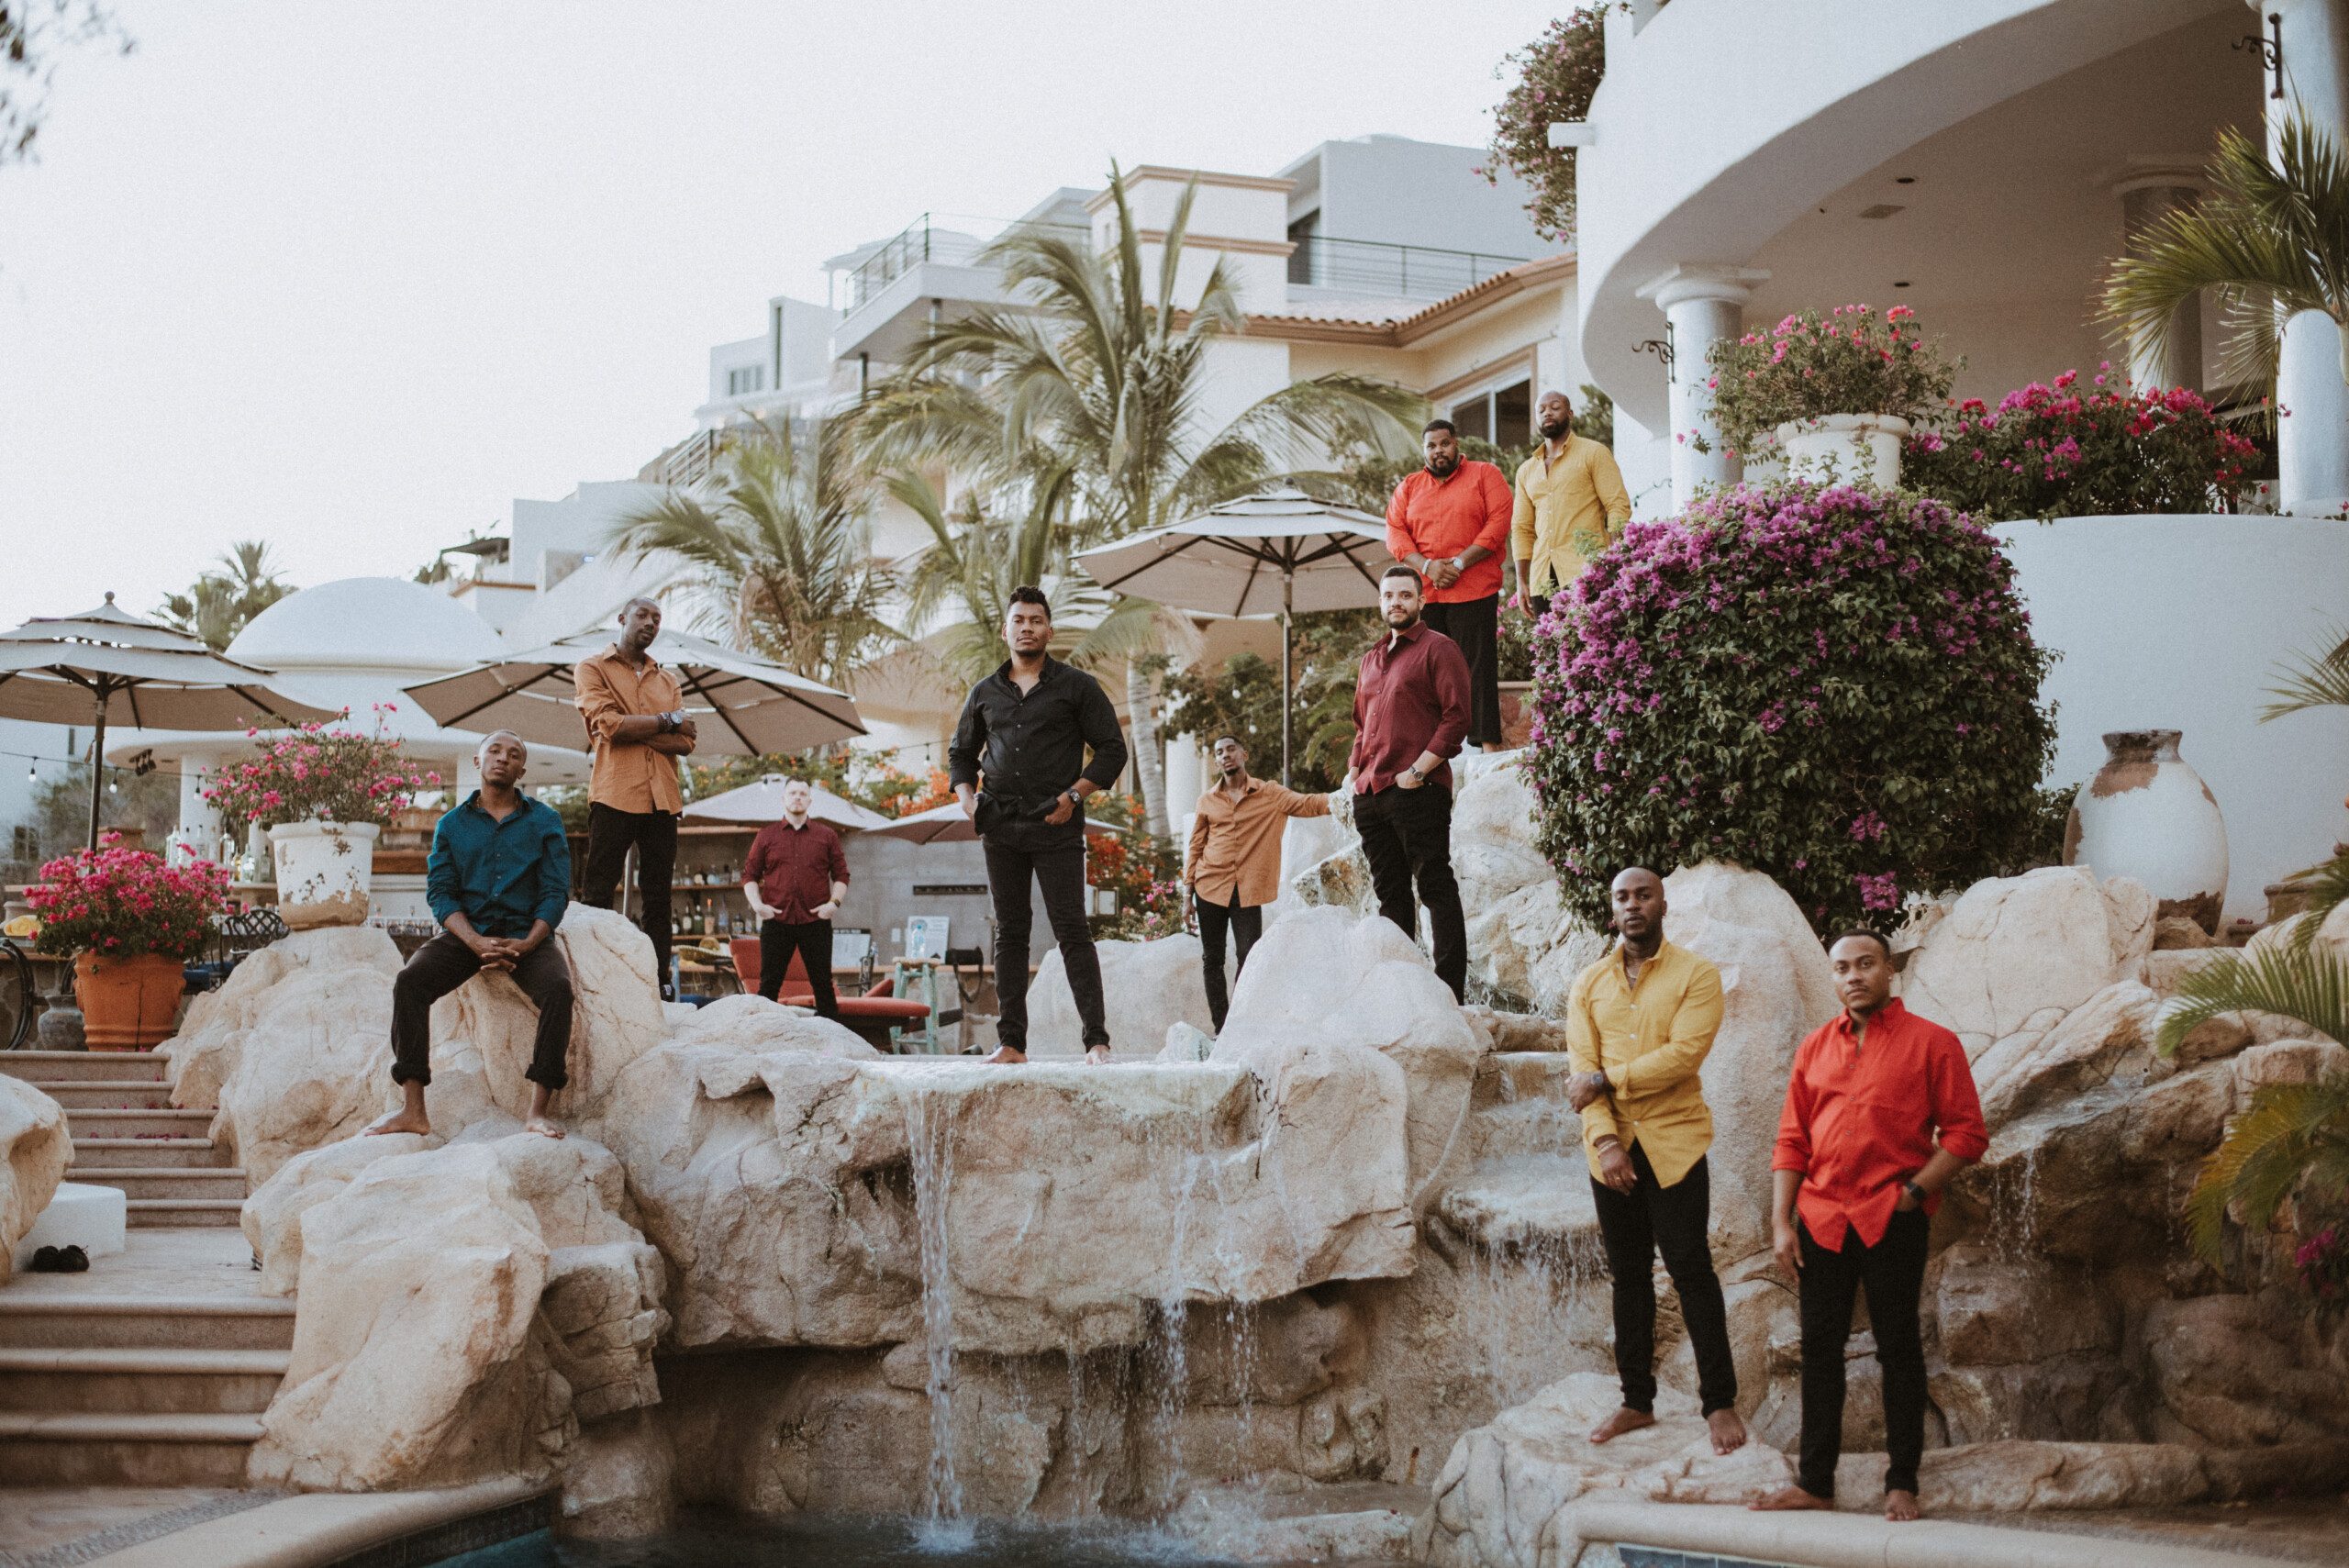 Group photoshoot by Bardot, Localgrapher in Cabo San Lucas